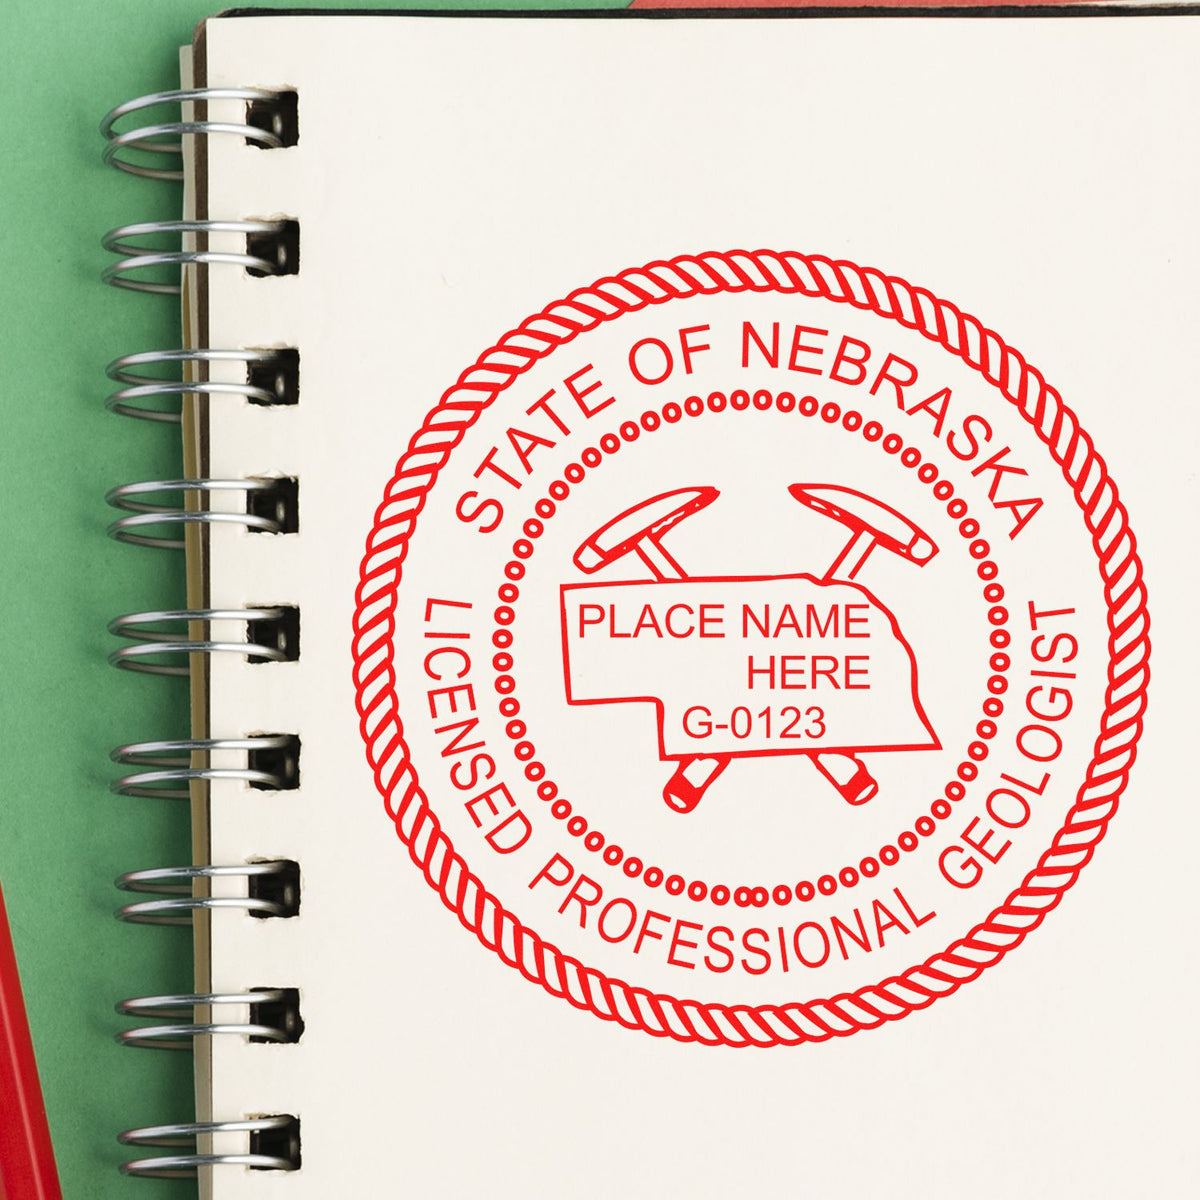 An in use photo of the Nebraska Professional Geologist Seal Stamp showing a sample imprint on a cardstock